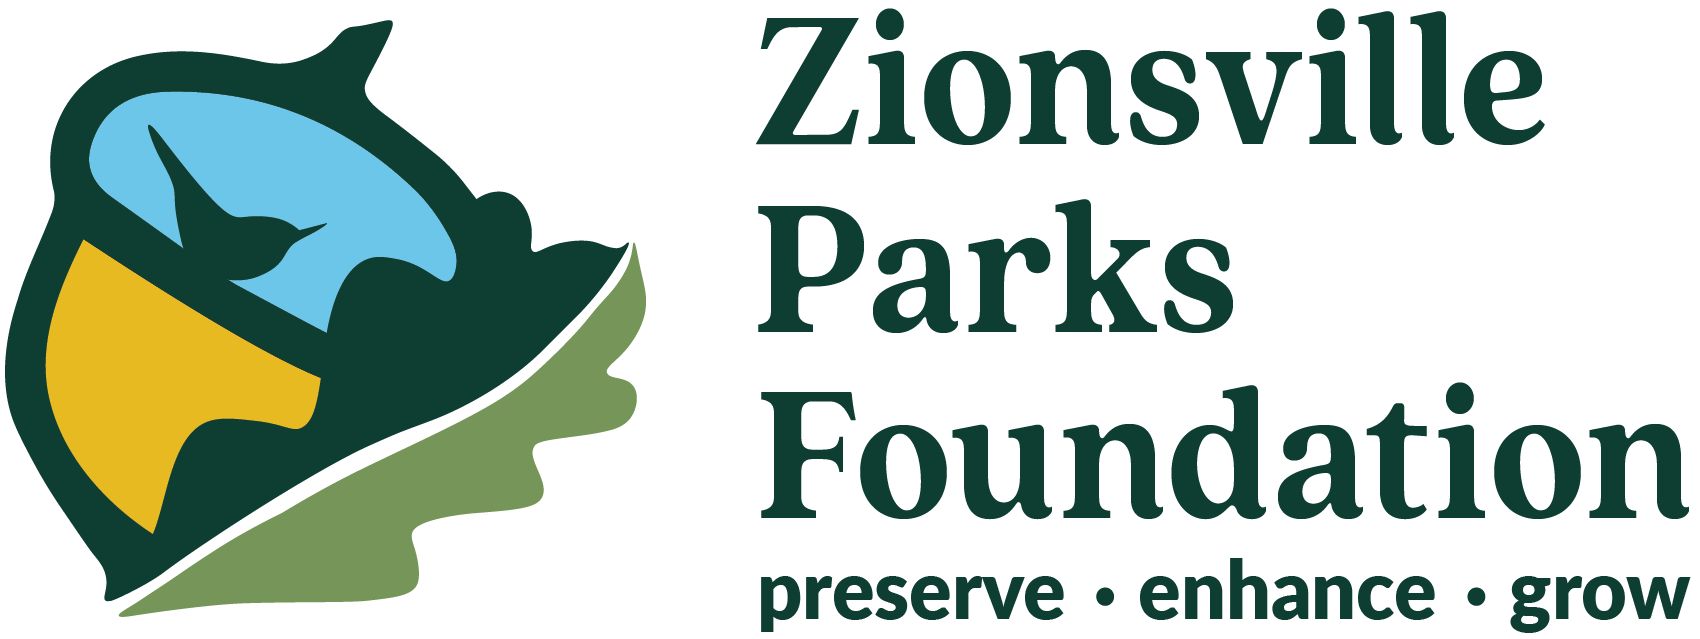 Zionsville Parks Foundation to the Foundation!